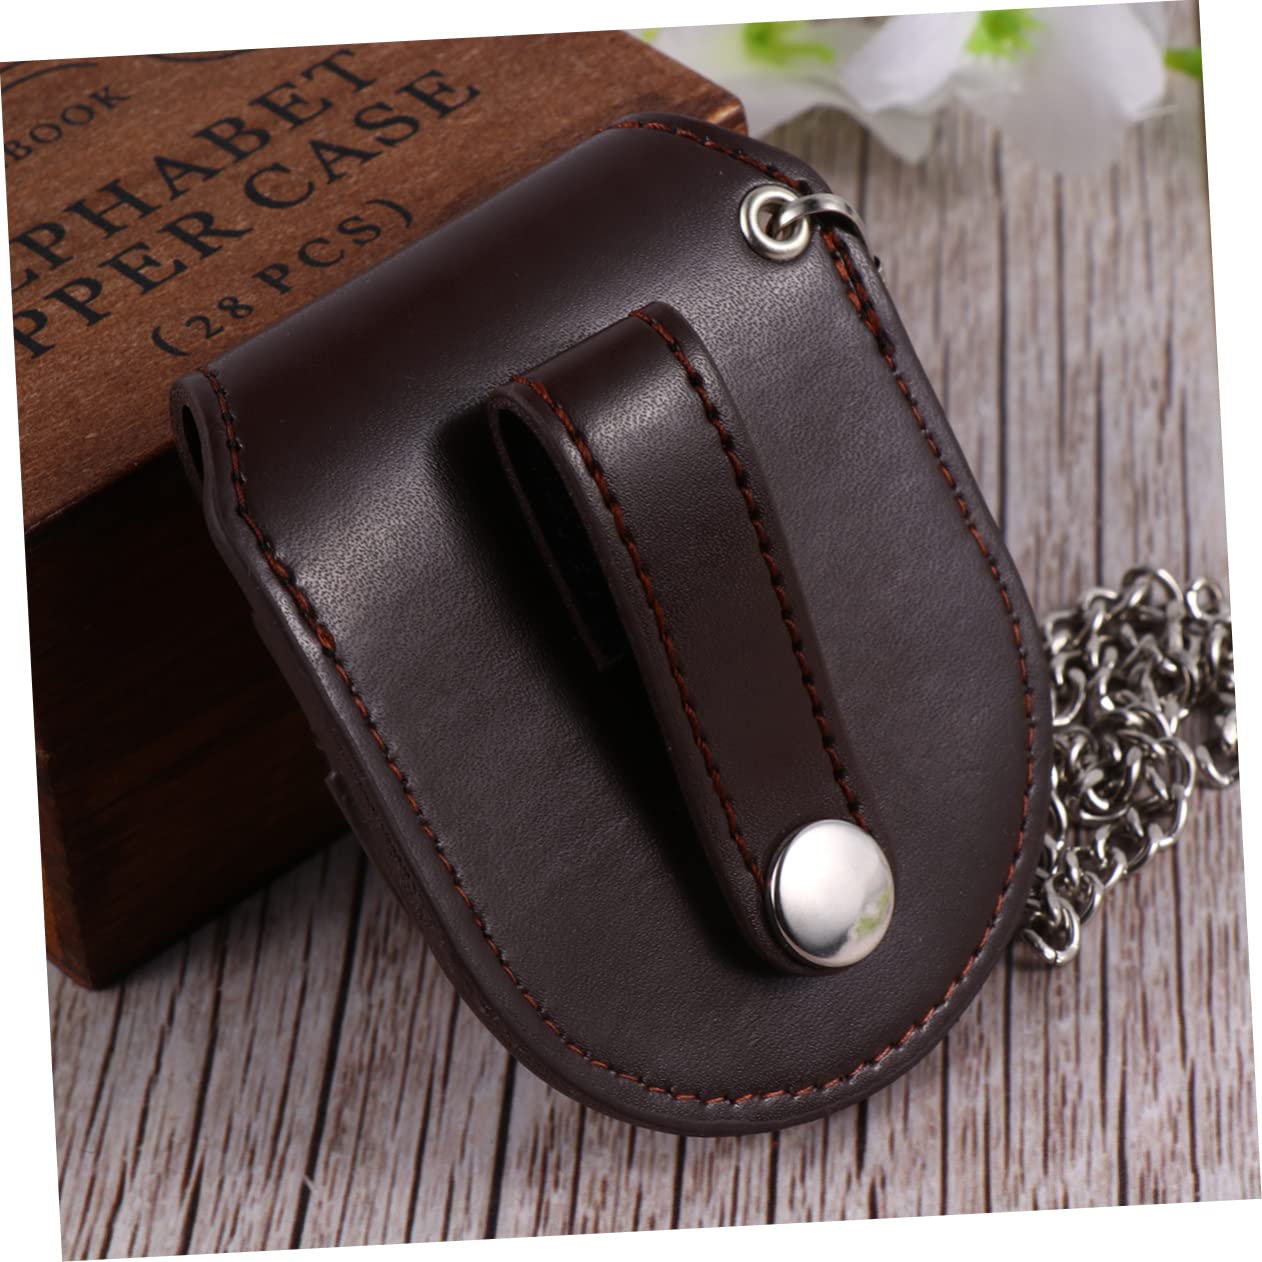 BESTOYARD 2pcs Small Leather Pouch Leather Watch Pouch Pocket Men Watches Waist Changes Bag Watch Cover Mens Watches Watch Travel Case Sleeve for Men's Watches Pocket Watch Storage Bags Man